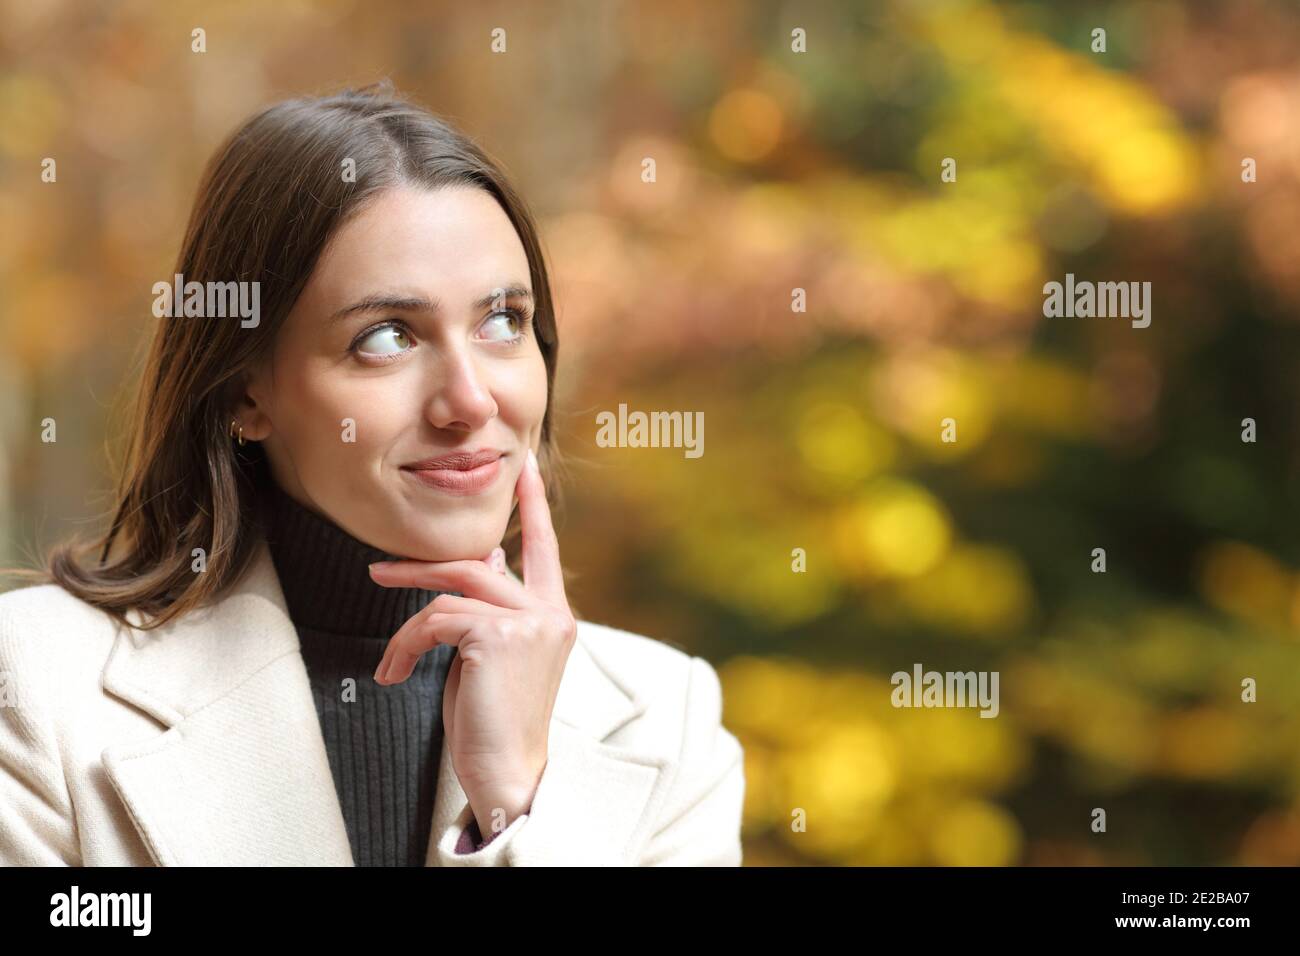 Portrait of a satisfied woman looking at side in a park in autumn season Stock Photo